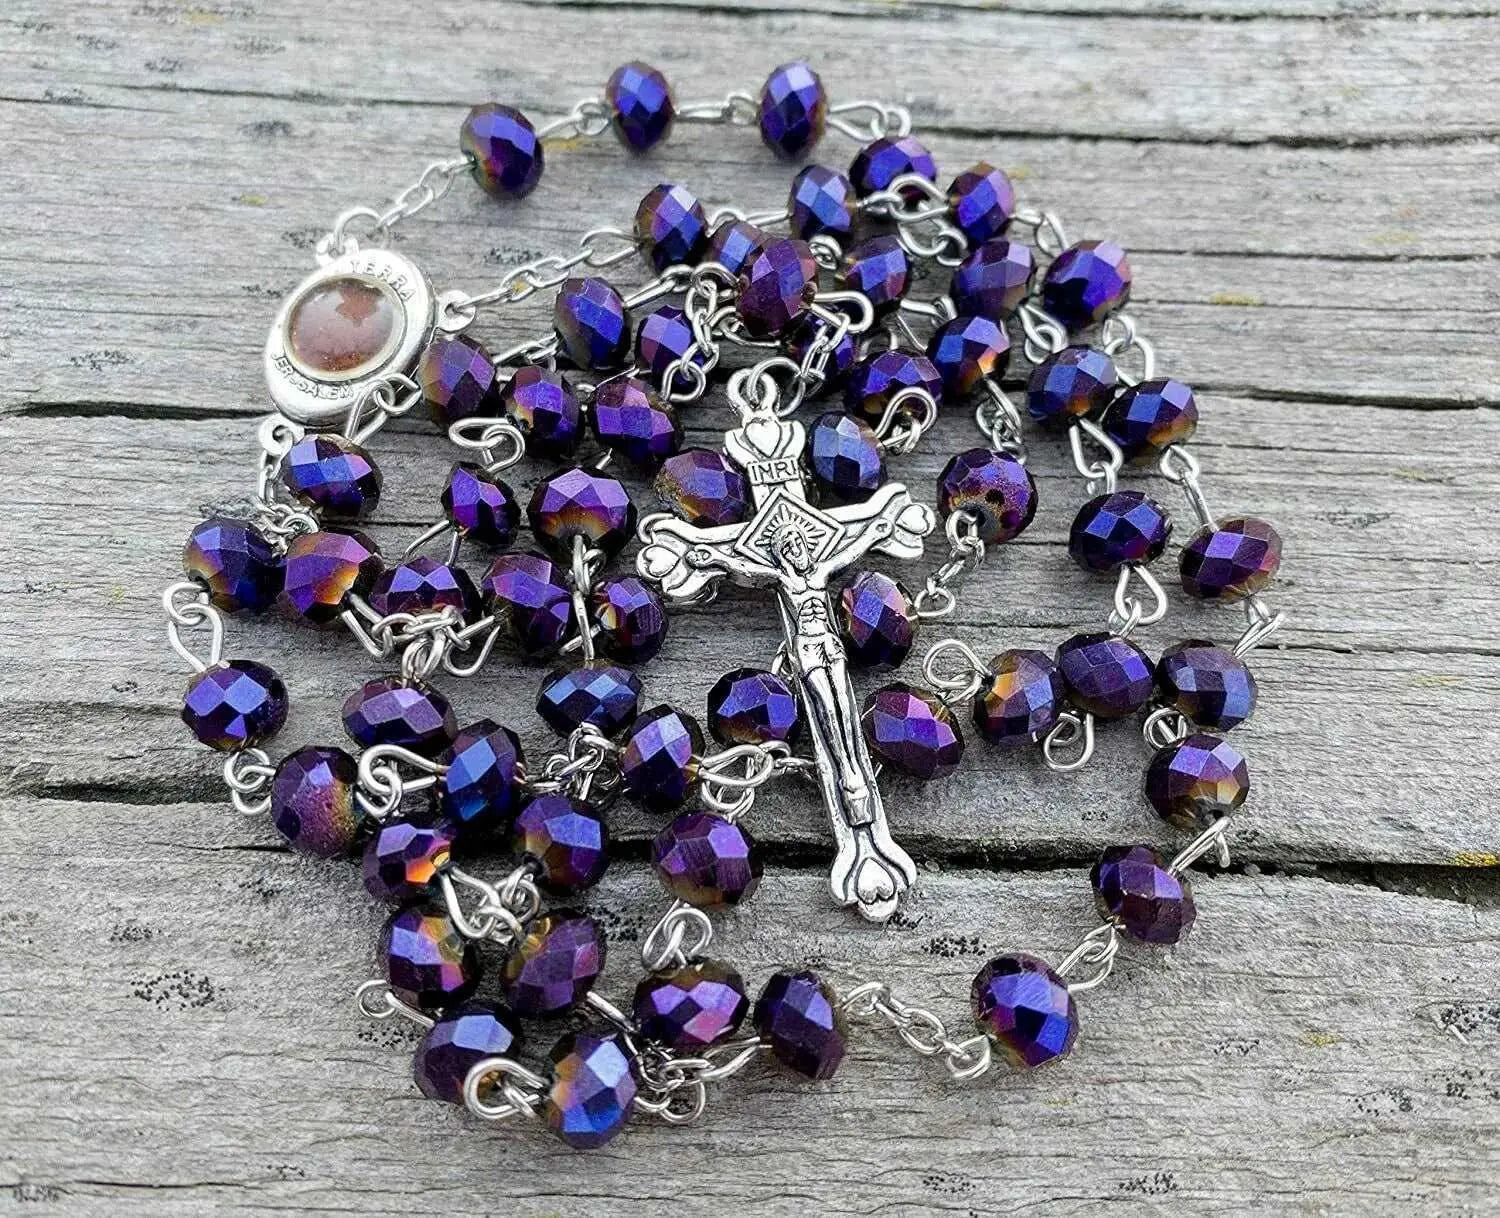 Deep Purple Beads Rosary Necklace Crystallized Chaplet Holy Soil & Cross Nazareth Store